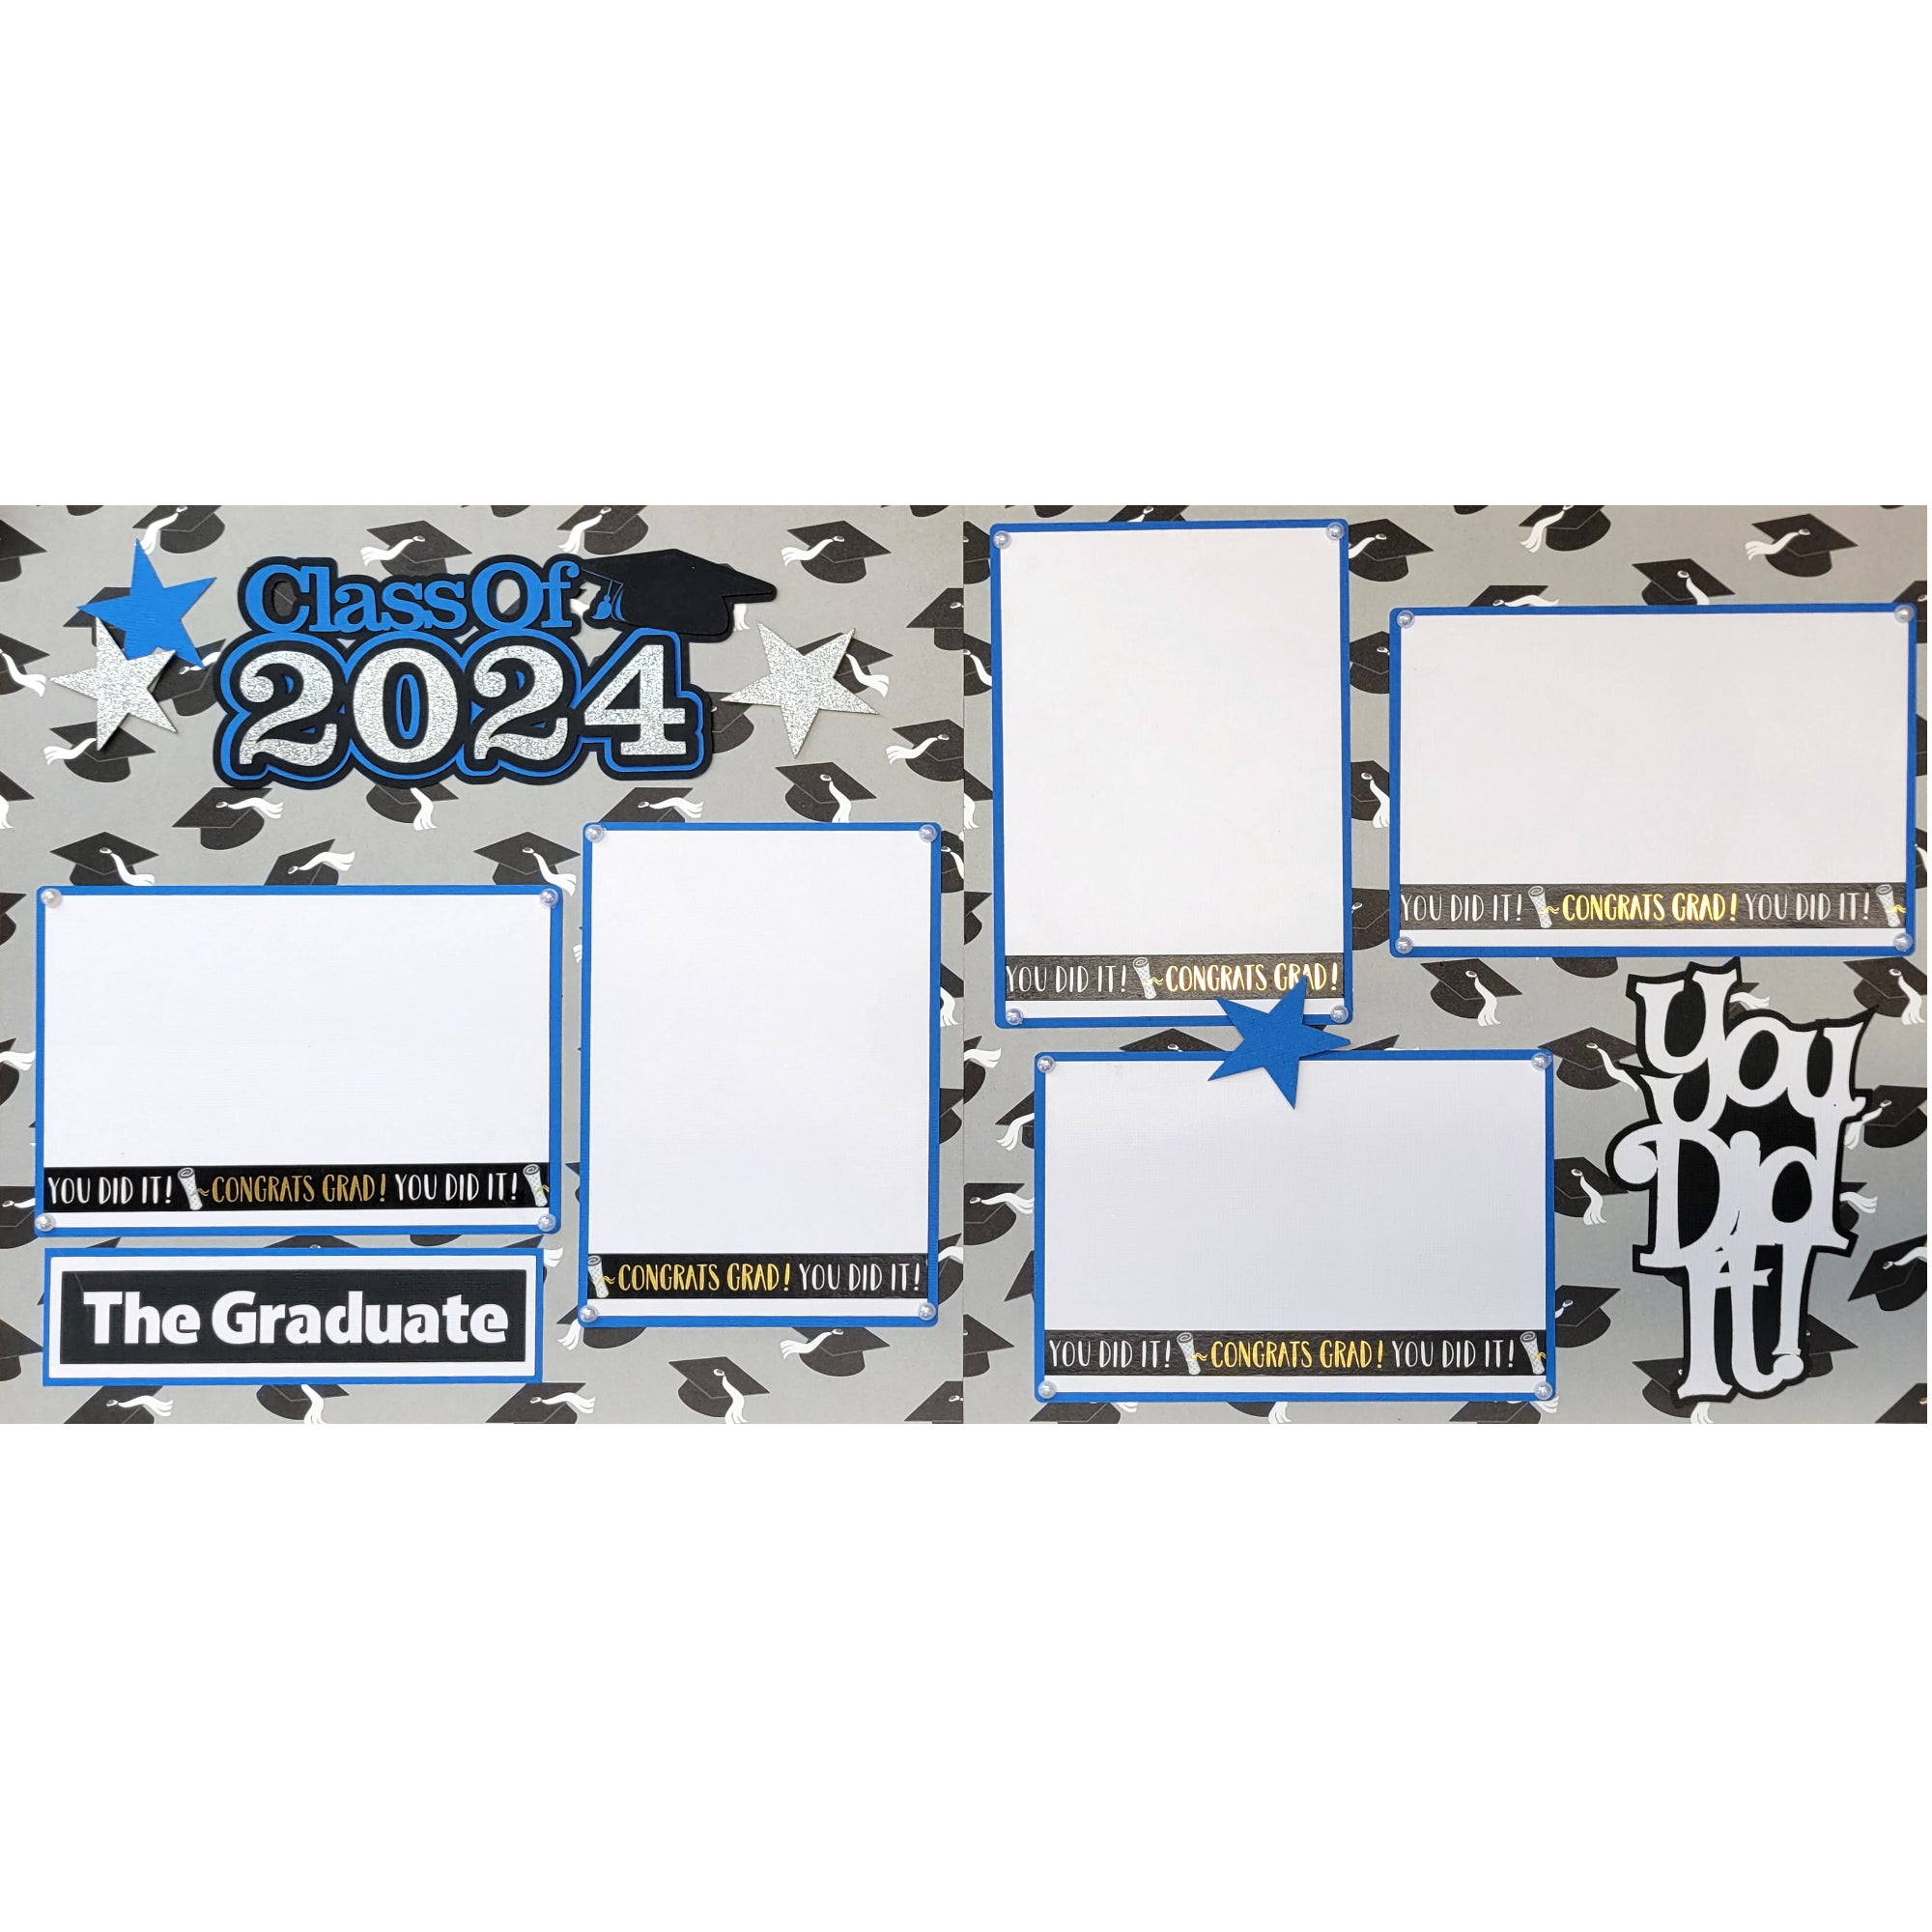 Graduation Collection Class of 2024 Customized, Premade Scrapbook Pages by SSC Designs